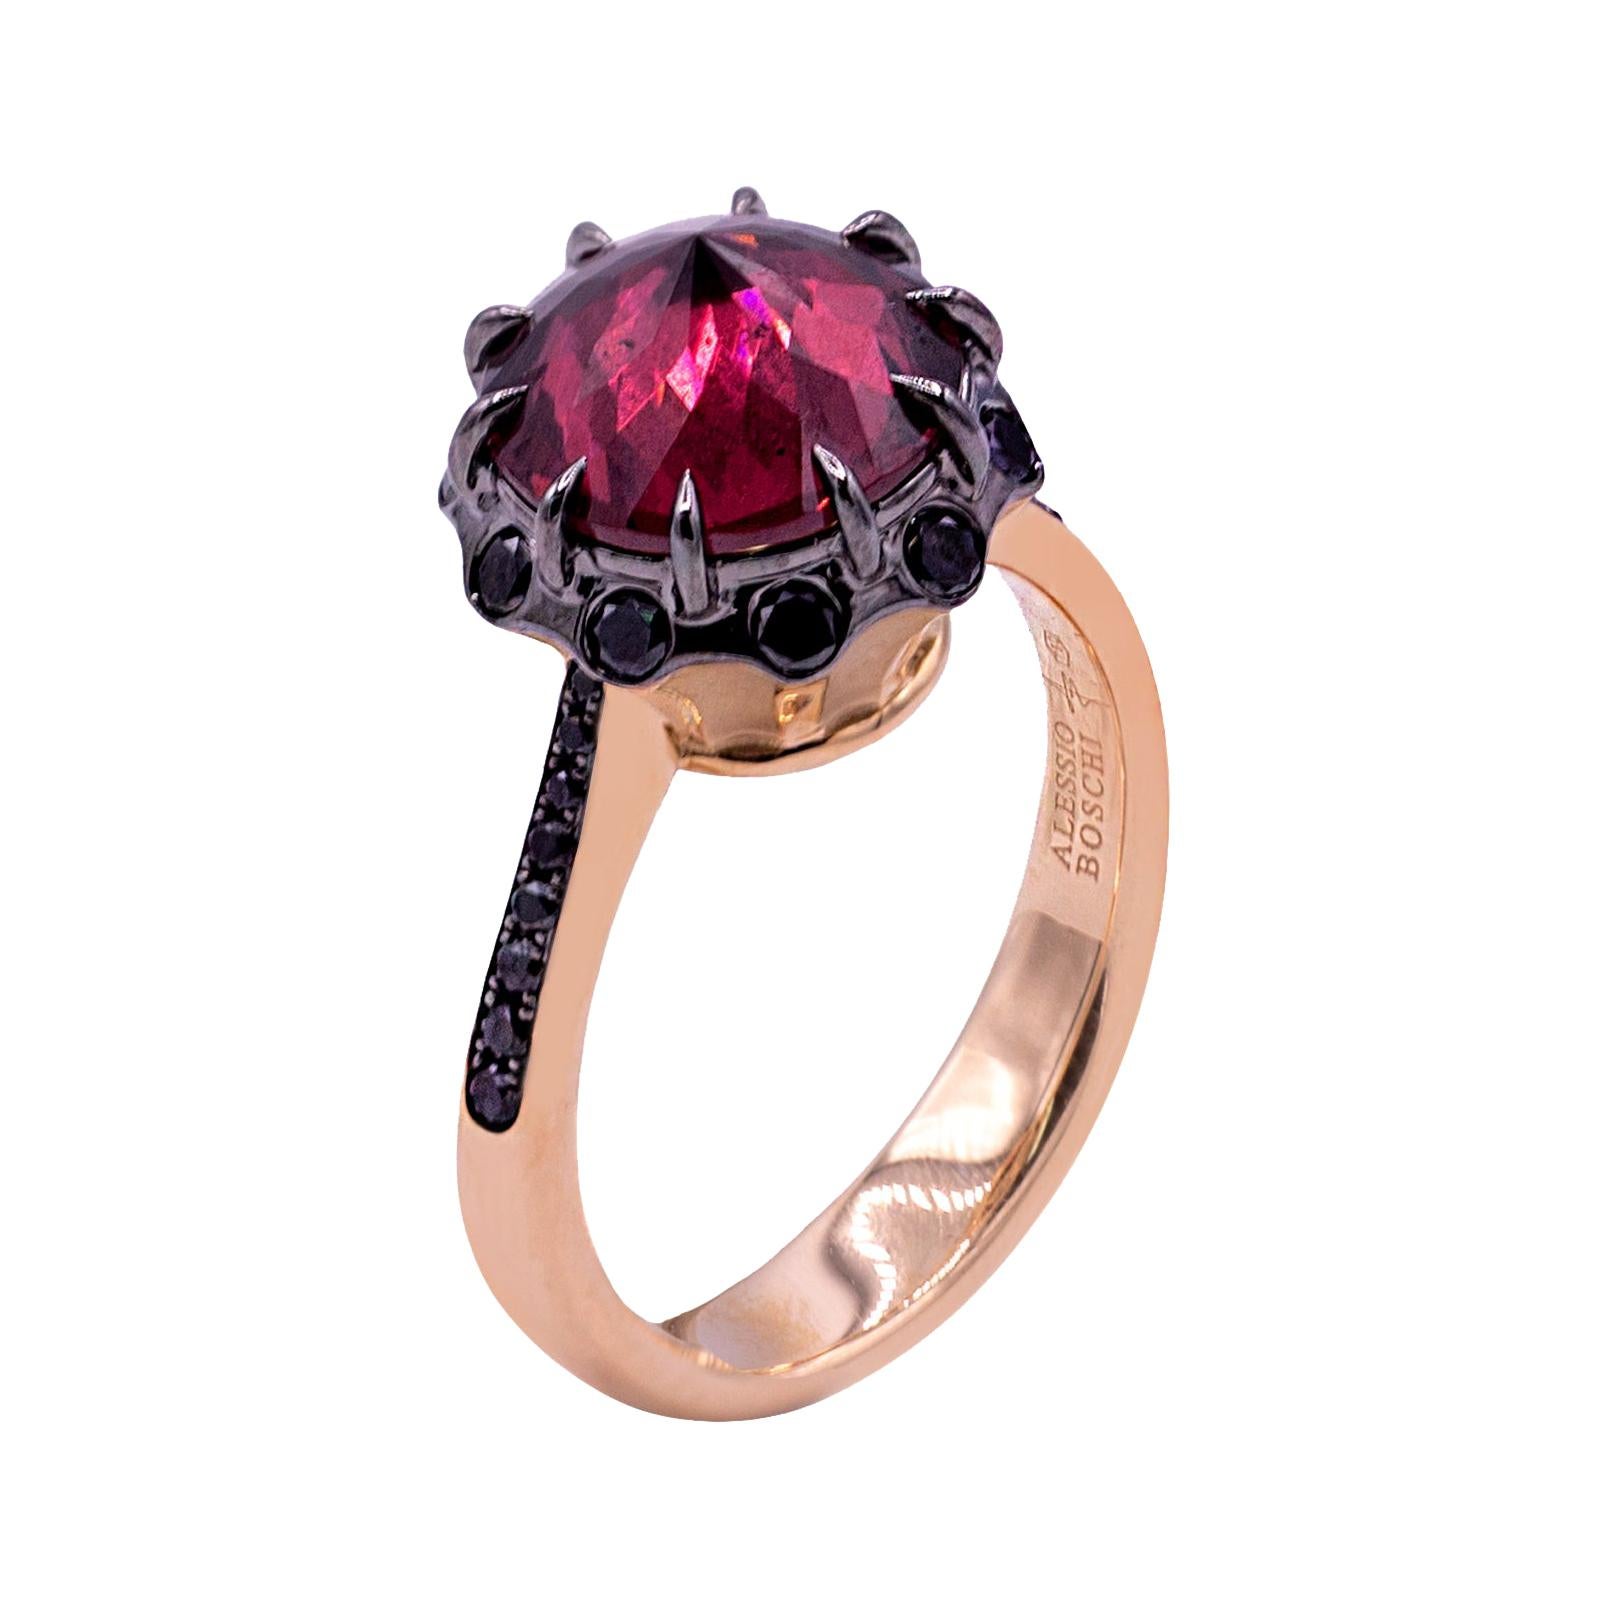 18k Rose and White Gold, Black Diamonds, Pink Tourmaline For Sale